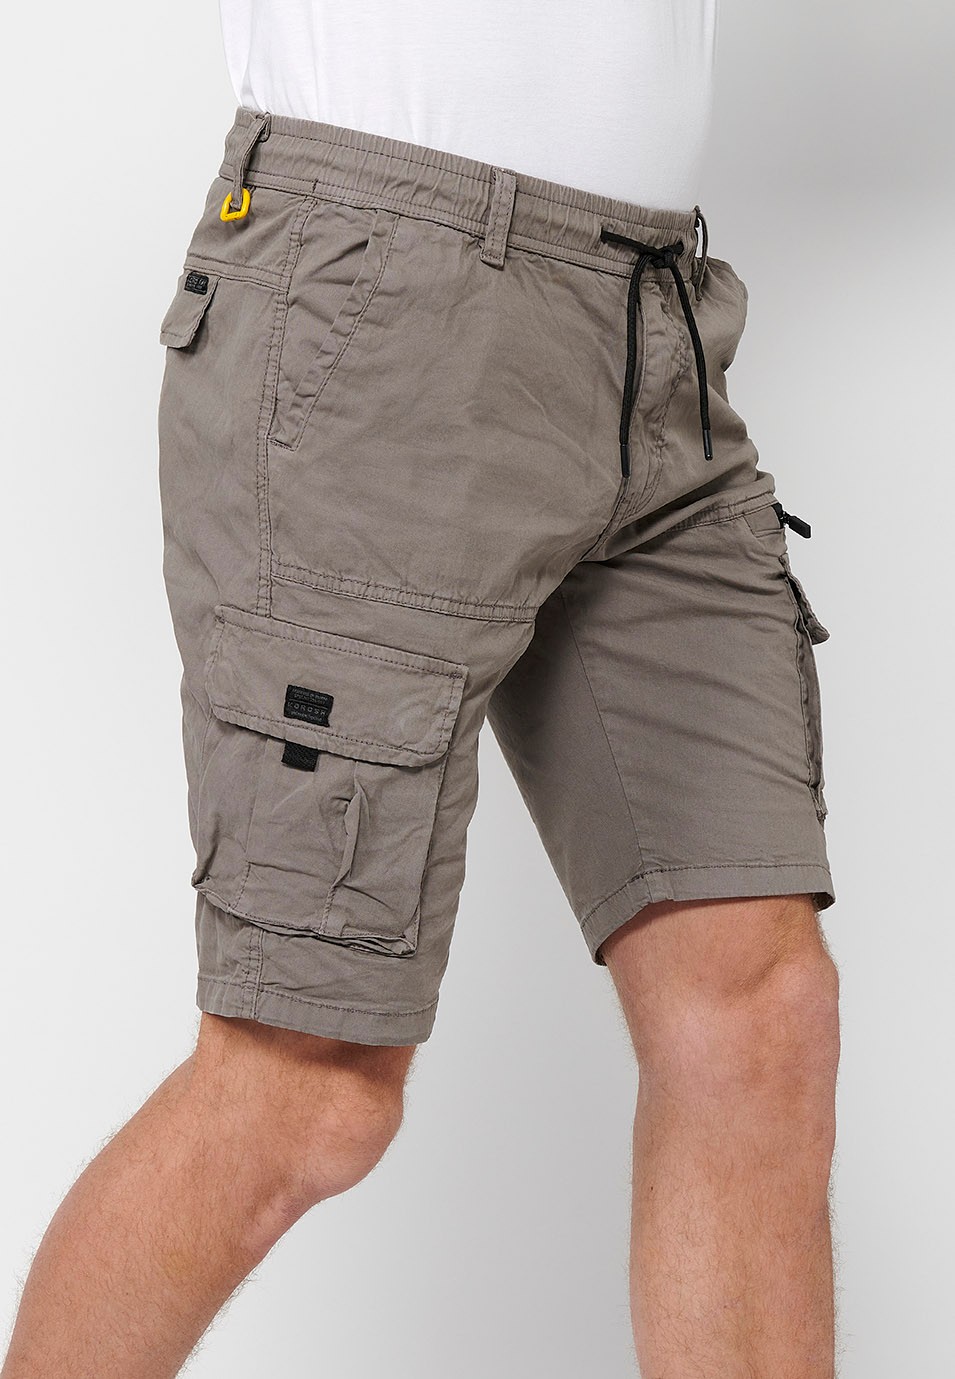 Cargo shorts with side pockets with flap and front closure with zipper and button Taupe Color for Men 1